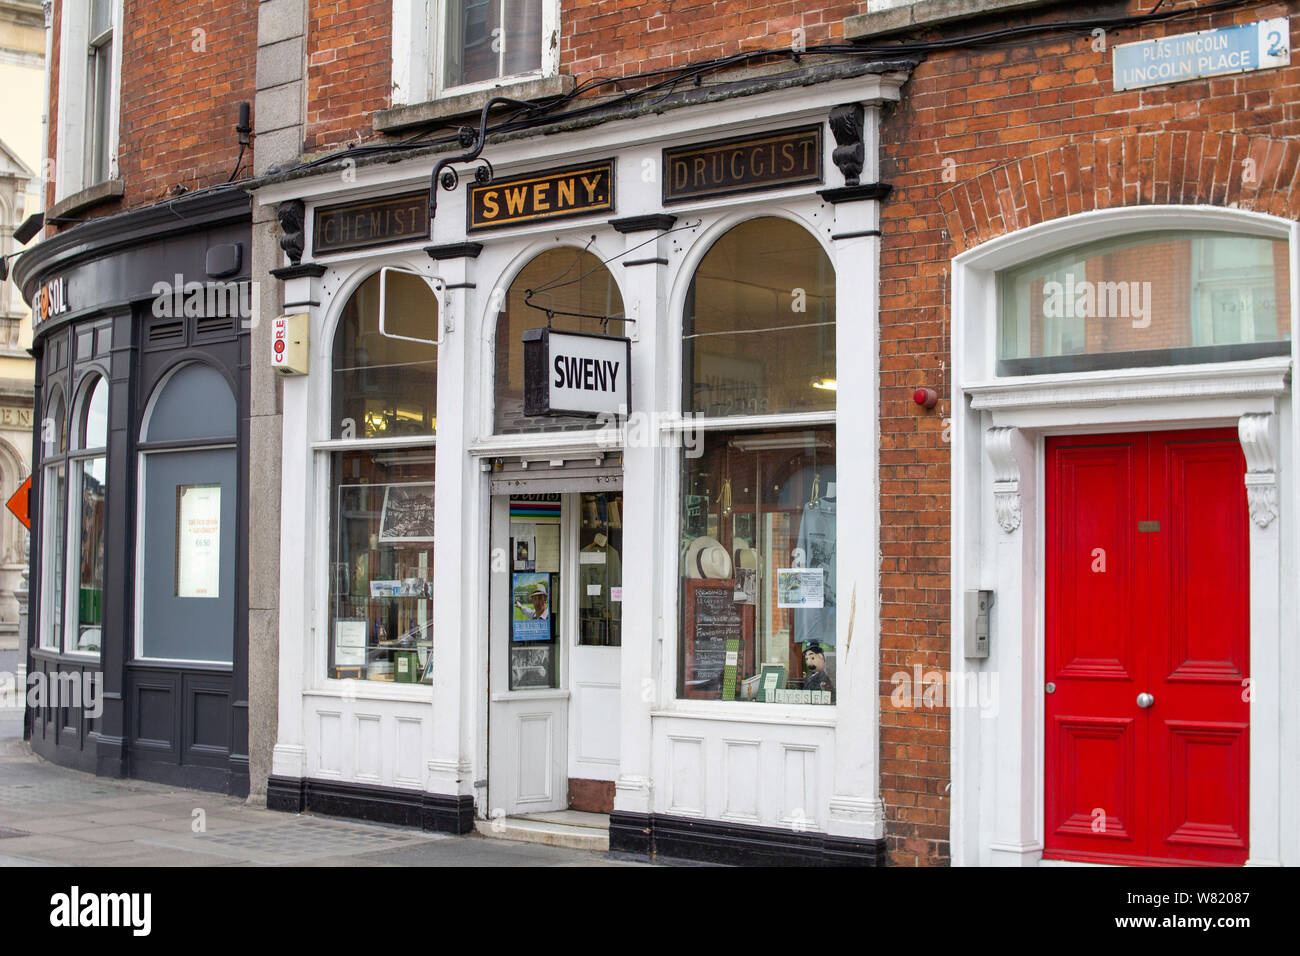 Sweny's Chemist and Druggist, in Lincoln Place, Dublin. Mentioned in James Joyce’s Ulysses where Bloom bought his lemon scented soap. Stock Photo